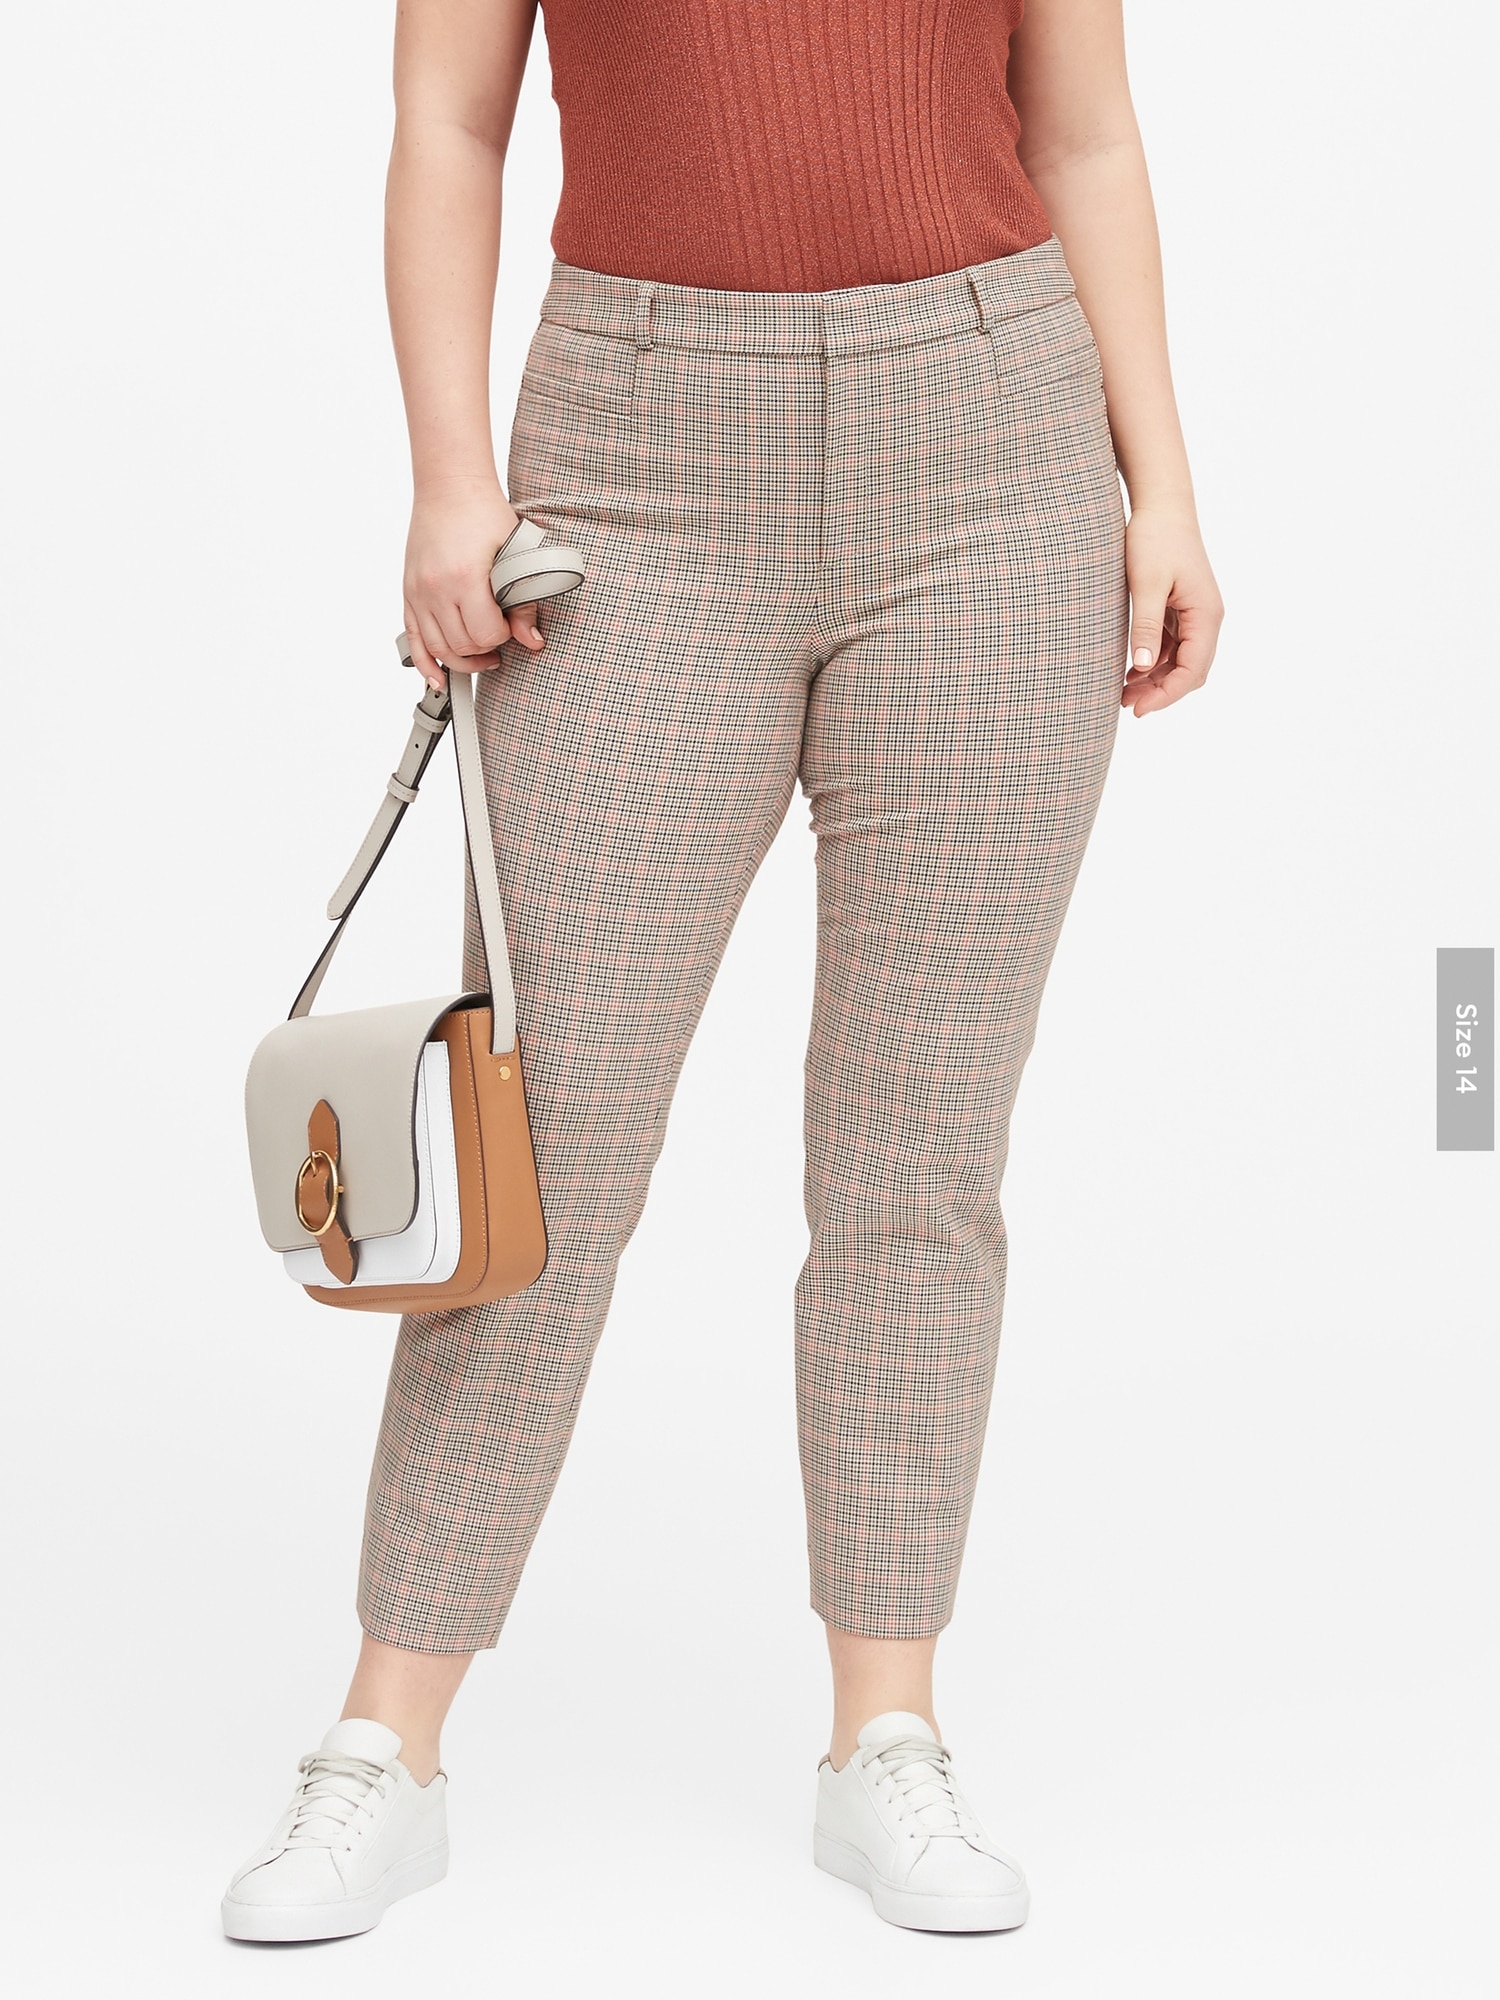 Banana Republic Sloan Pants: A (Not So Good) Review - FASHION AND FRAPPES %